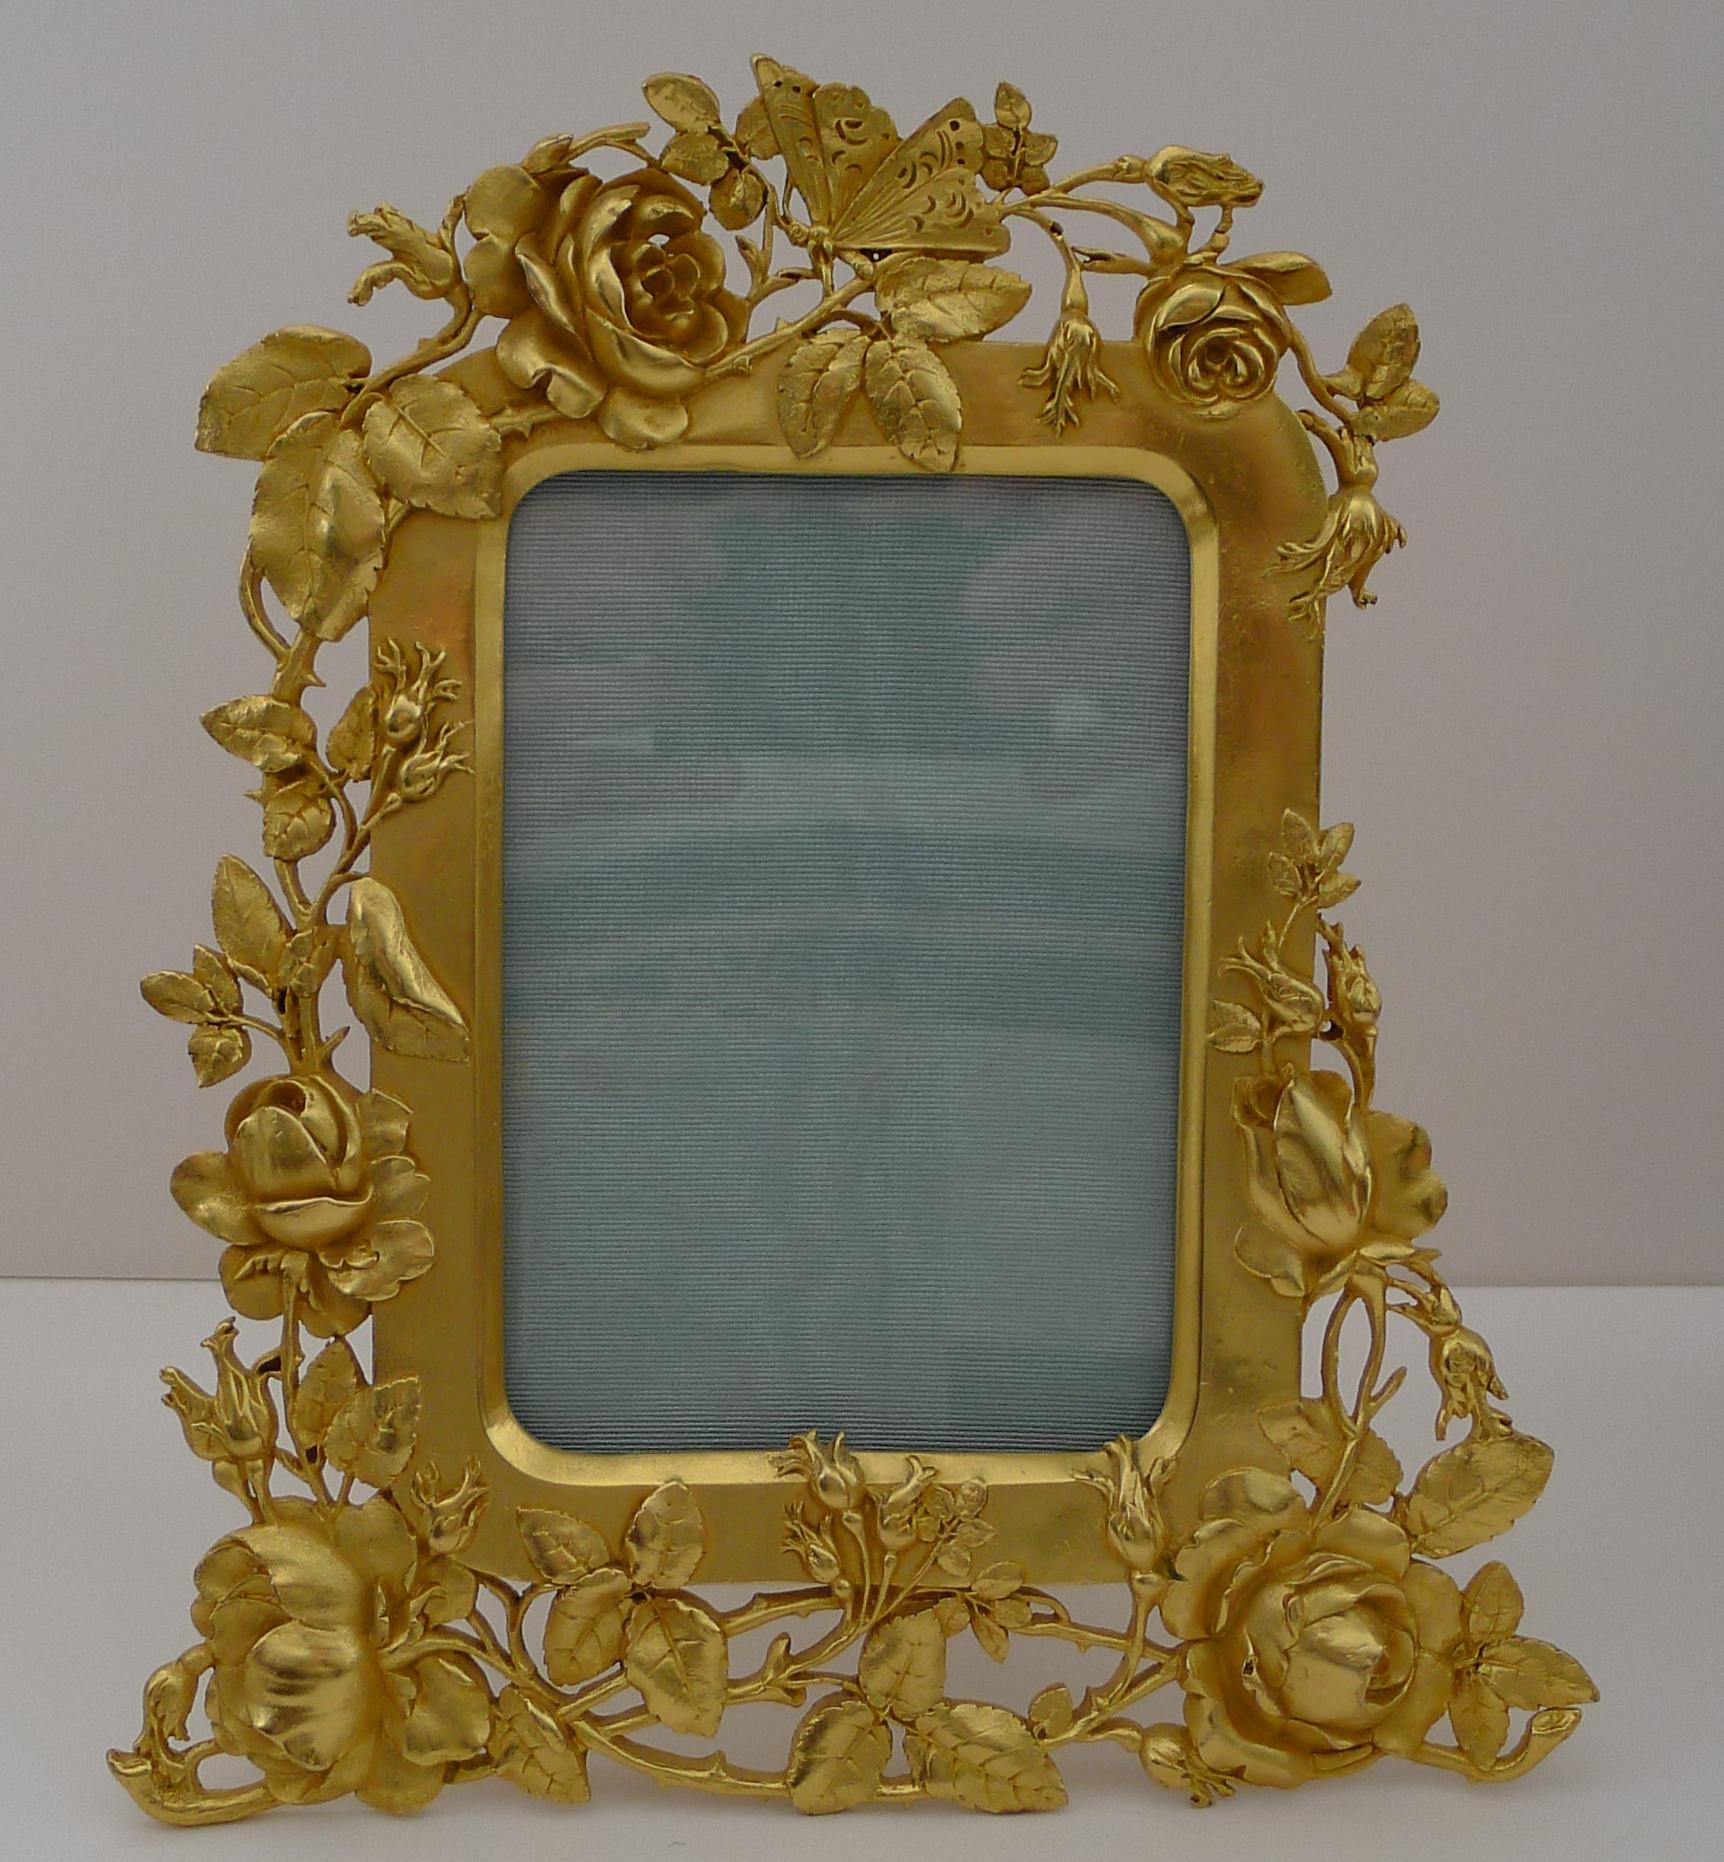 Heirloom Quality French Gilded Bronze Picture Frame c.1900 For Sale 1